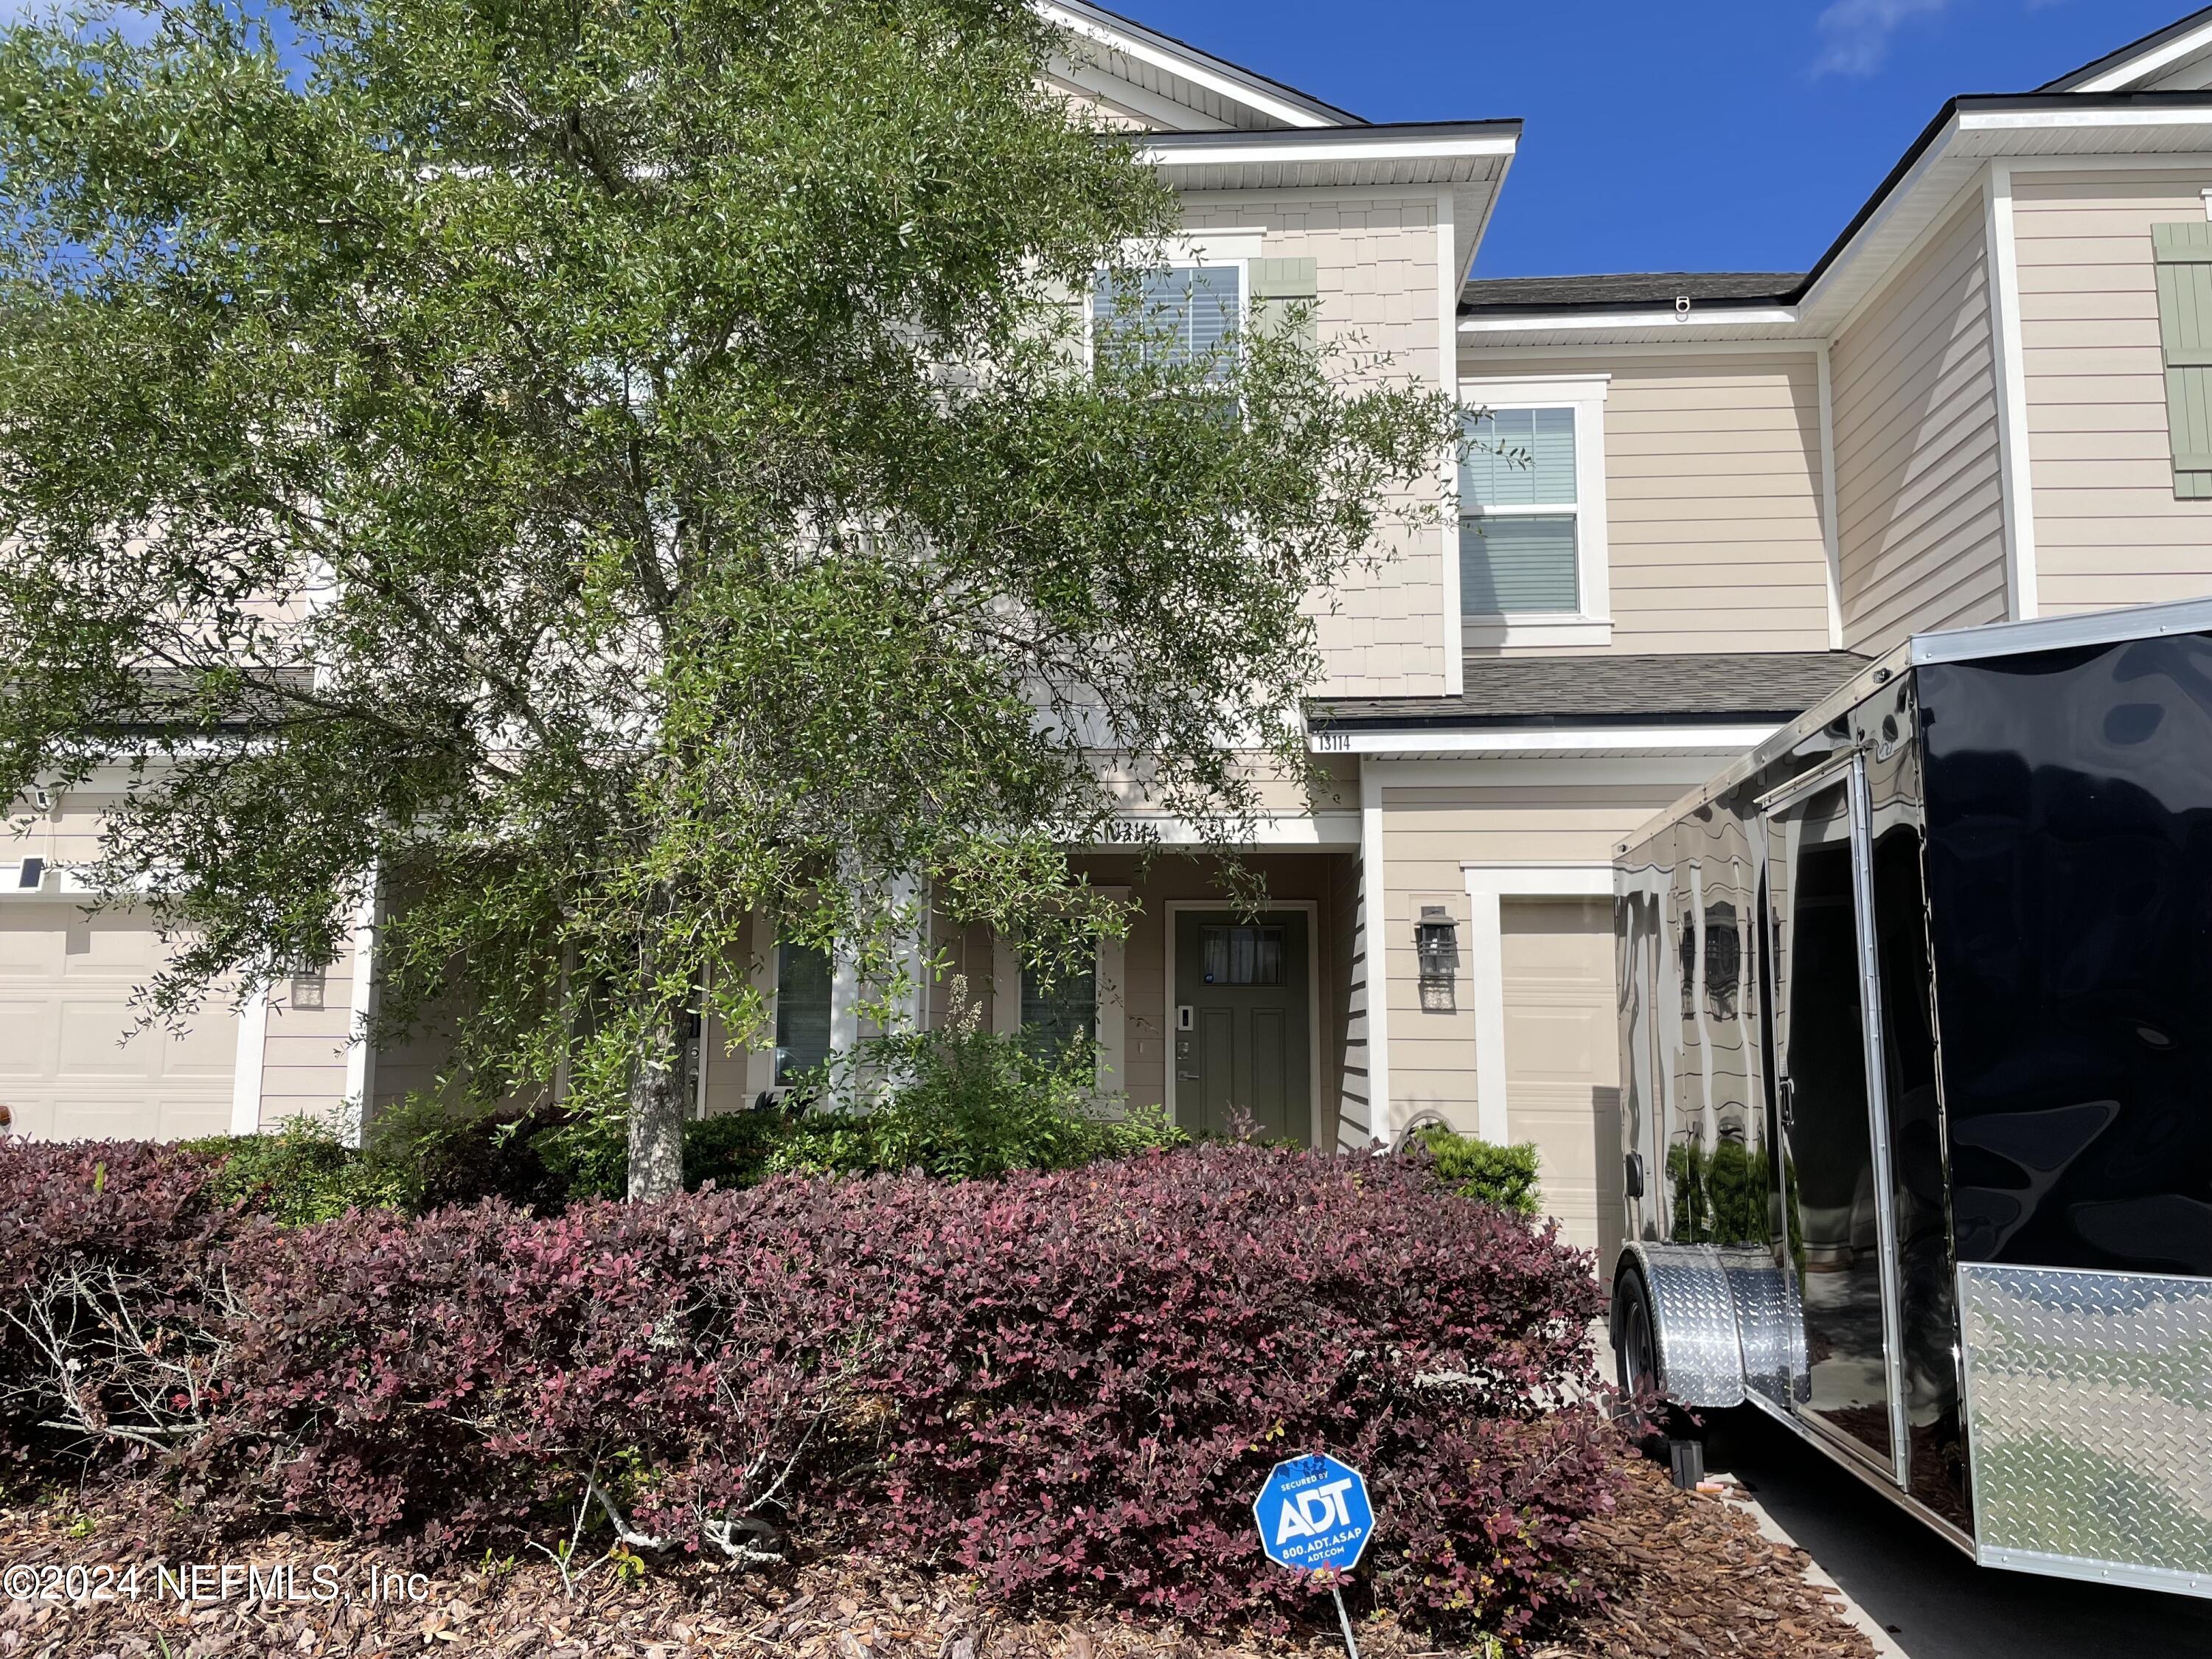 View Jacksonville, FL 32218 townhome